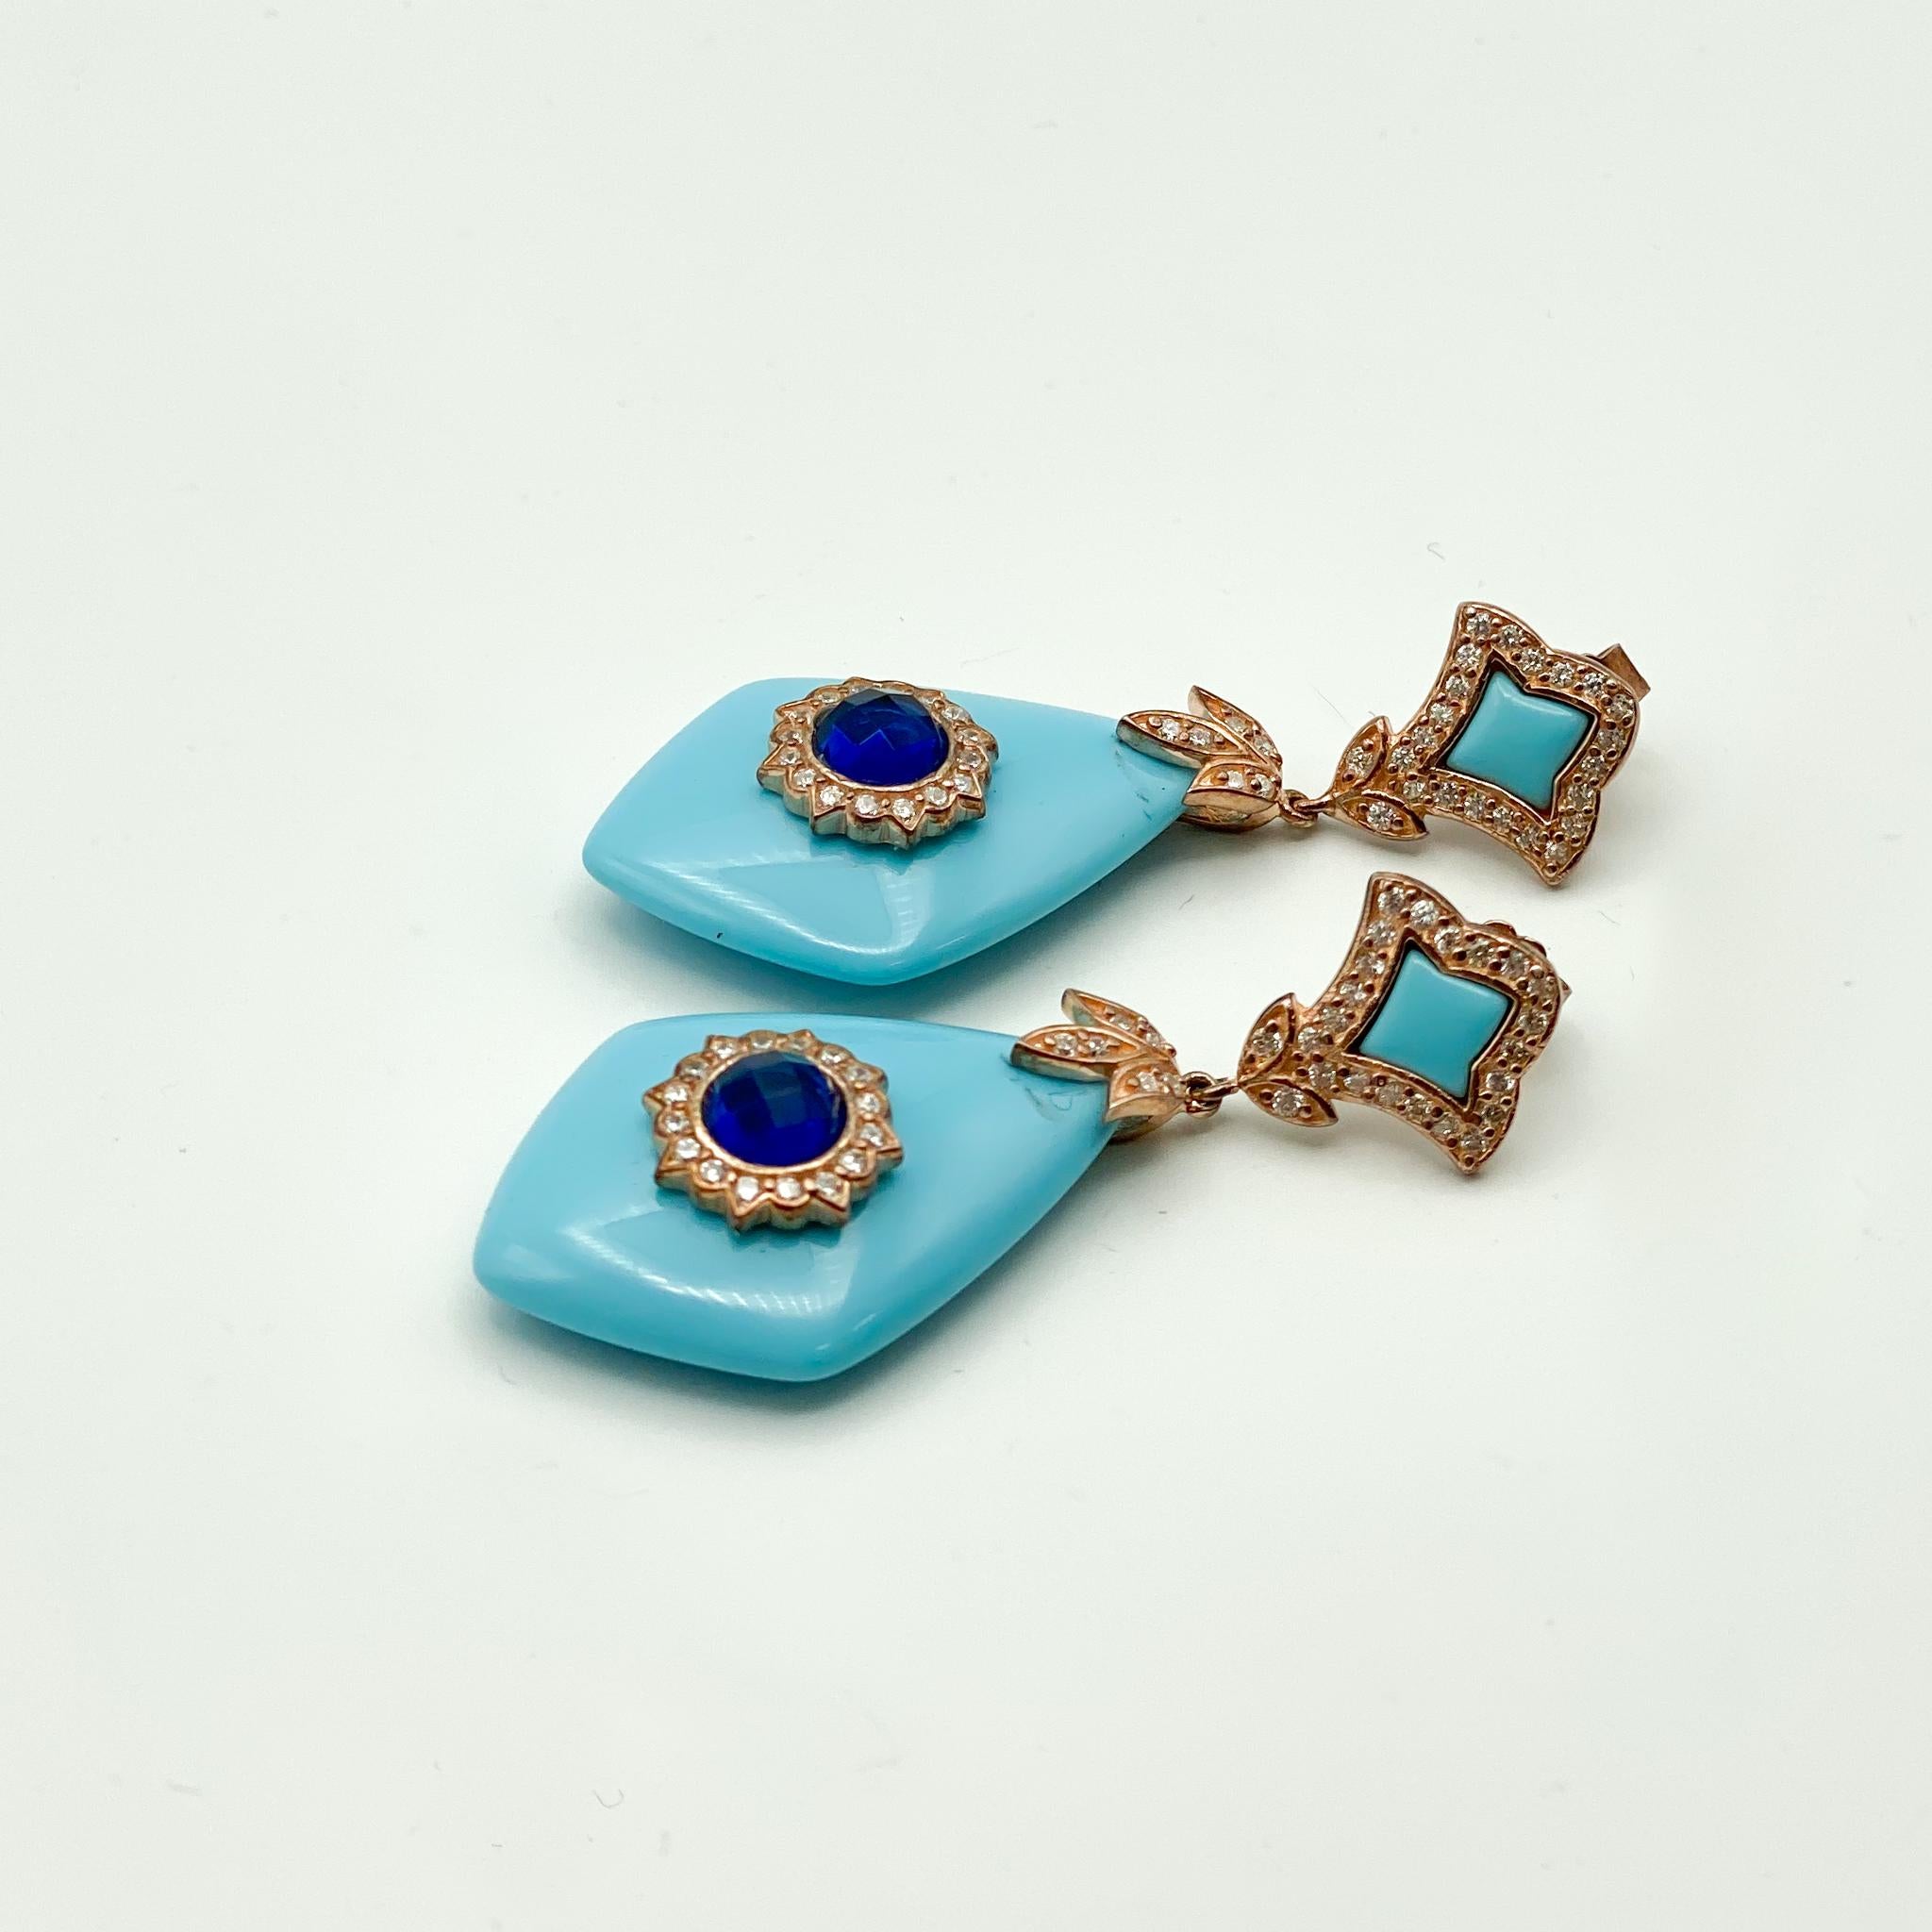 Cristina Sabatini design
Rose Gold Plated Sterling Silver & Natural Gemstones 
Shapes of blue, rose, & gold
Approximately 2.5 inches in length 